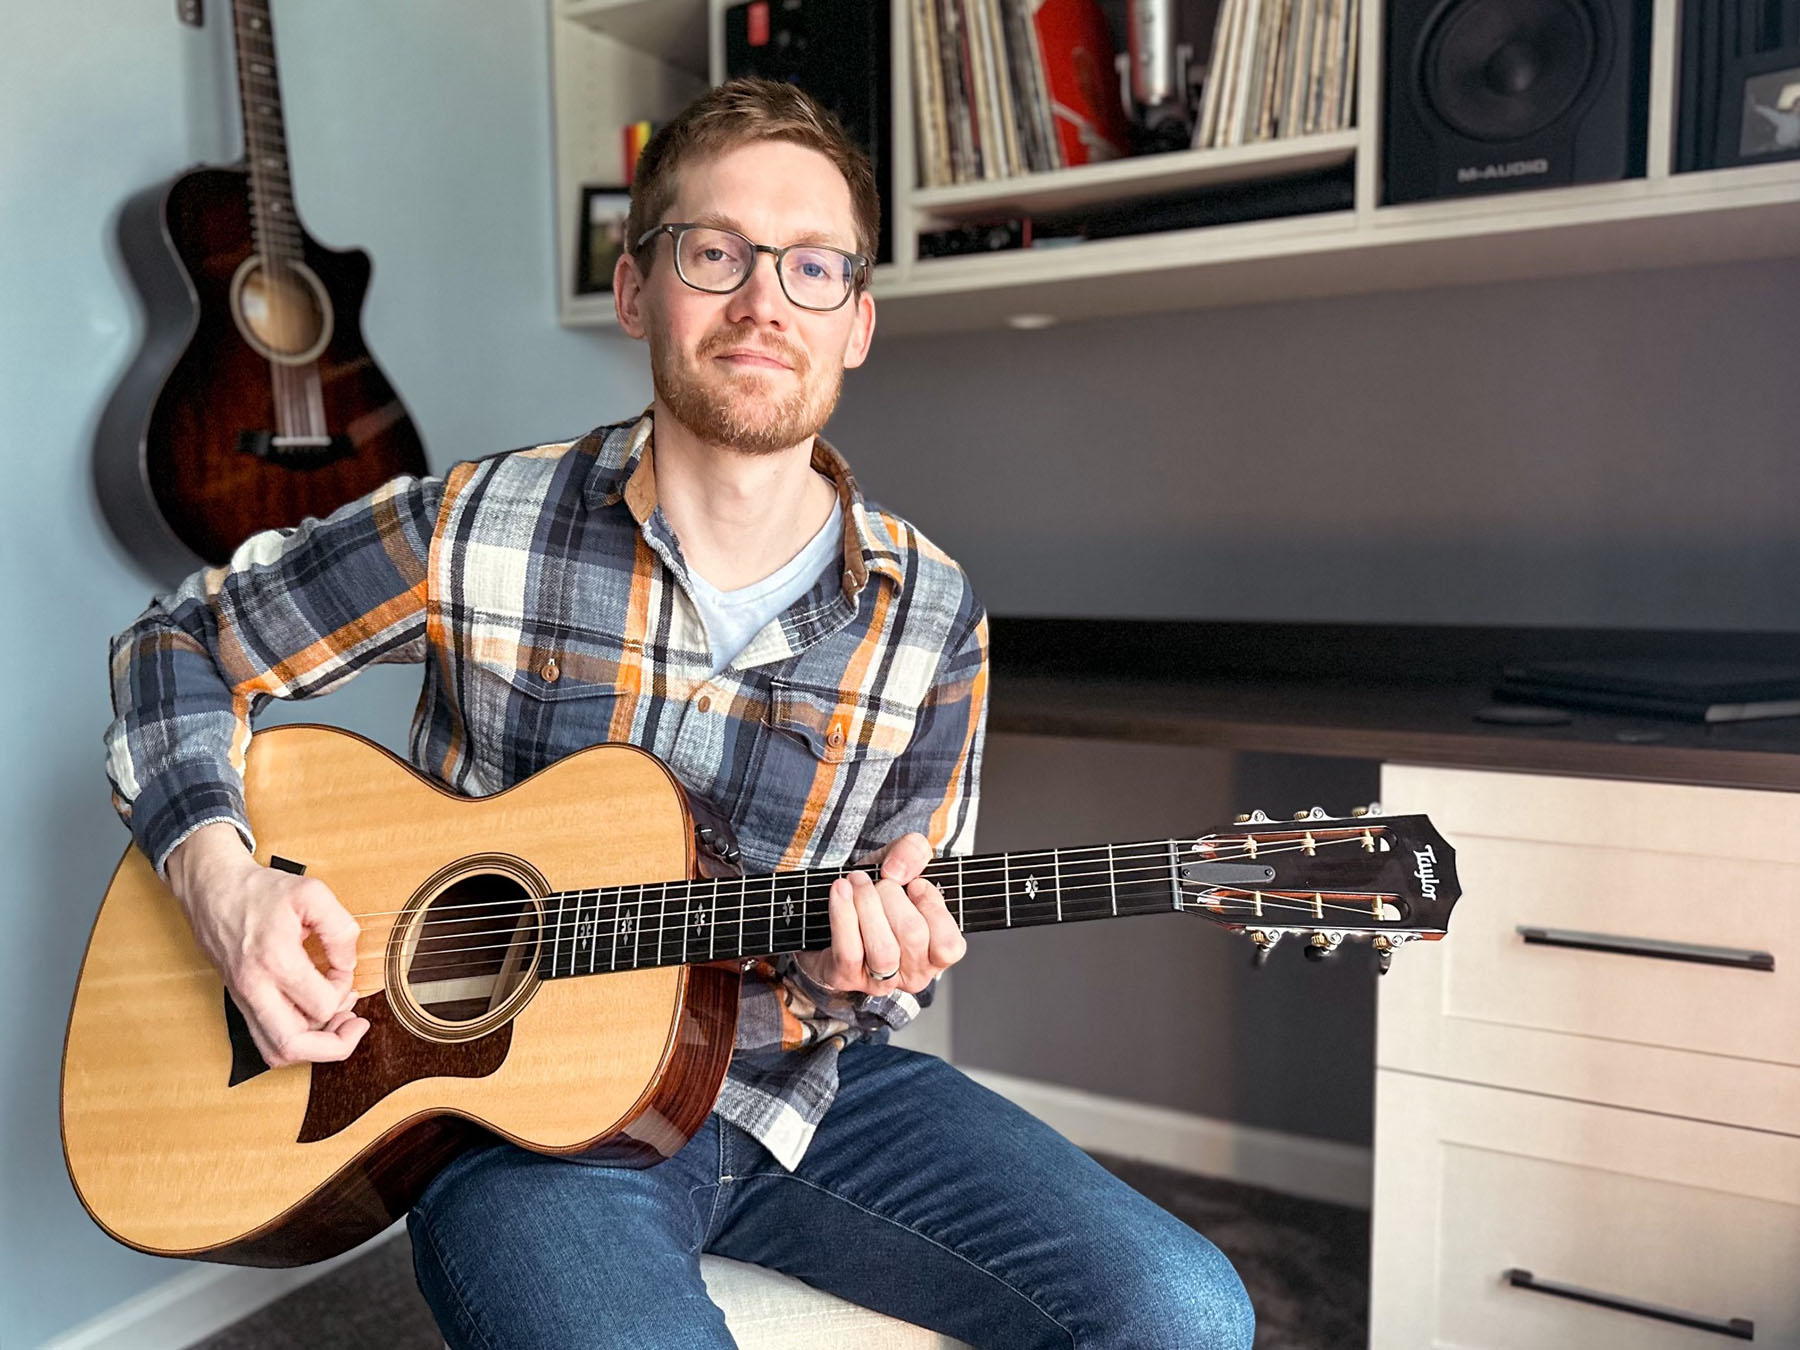 A man in jeans and a flannel shirt sits with an acoustic guitar